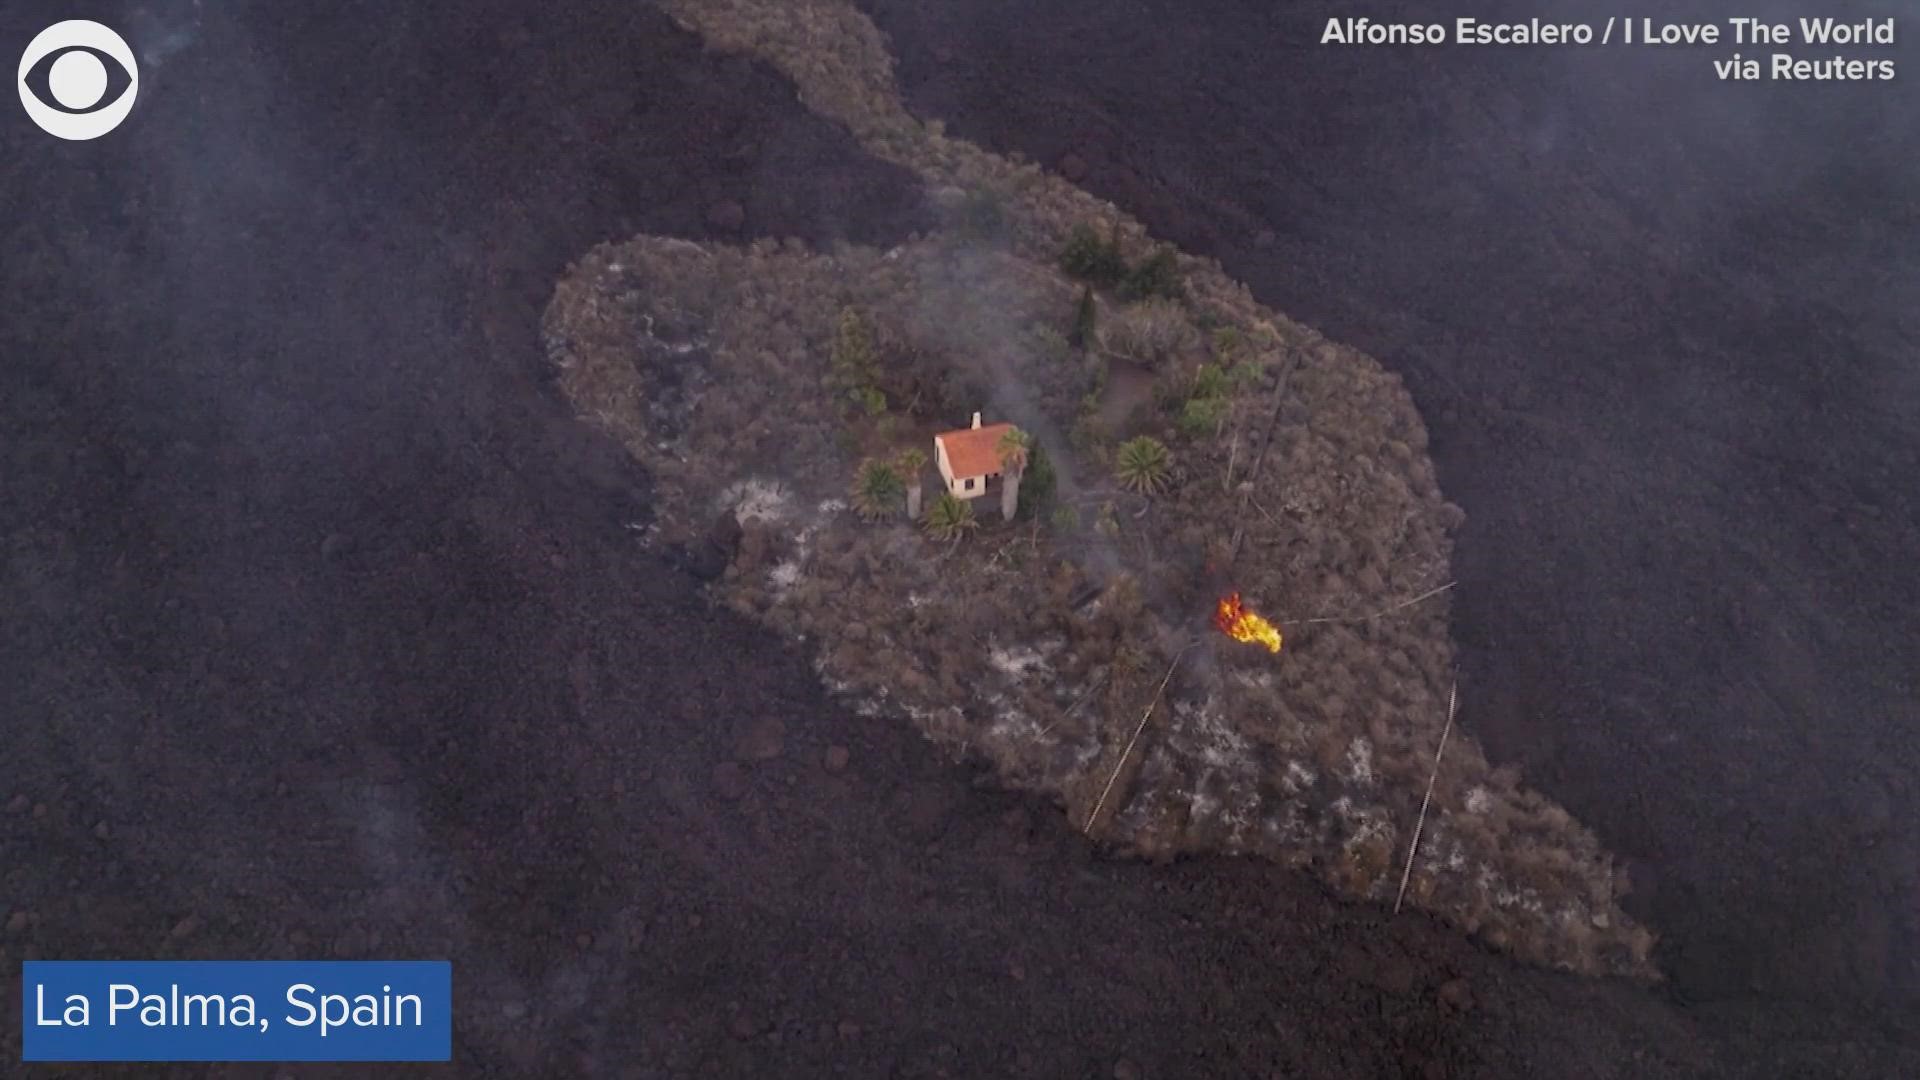 Drone footage shot recently over the island of La Palma in Spain shows a single house spared from flowing lava